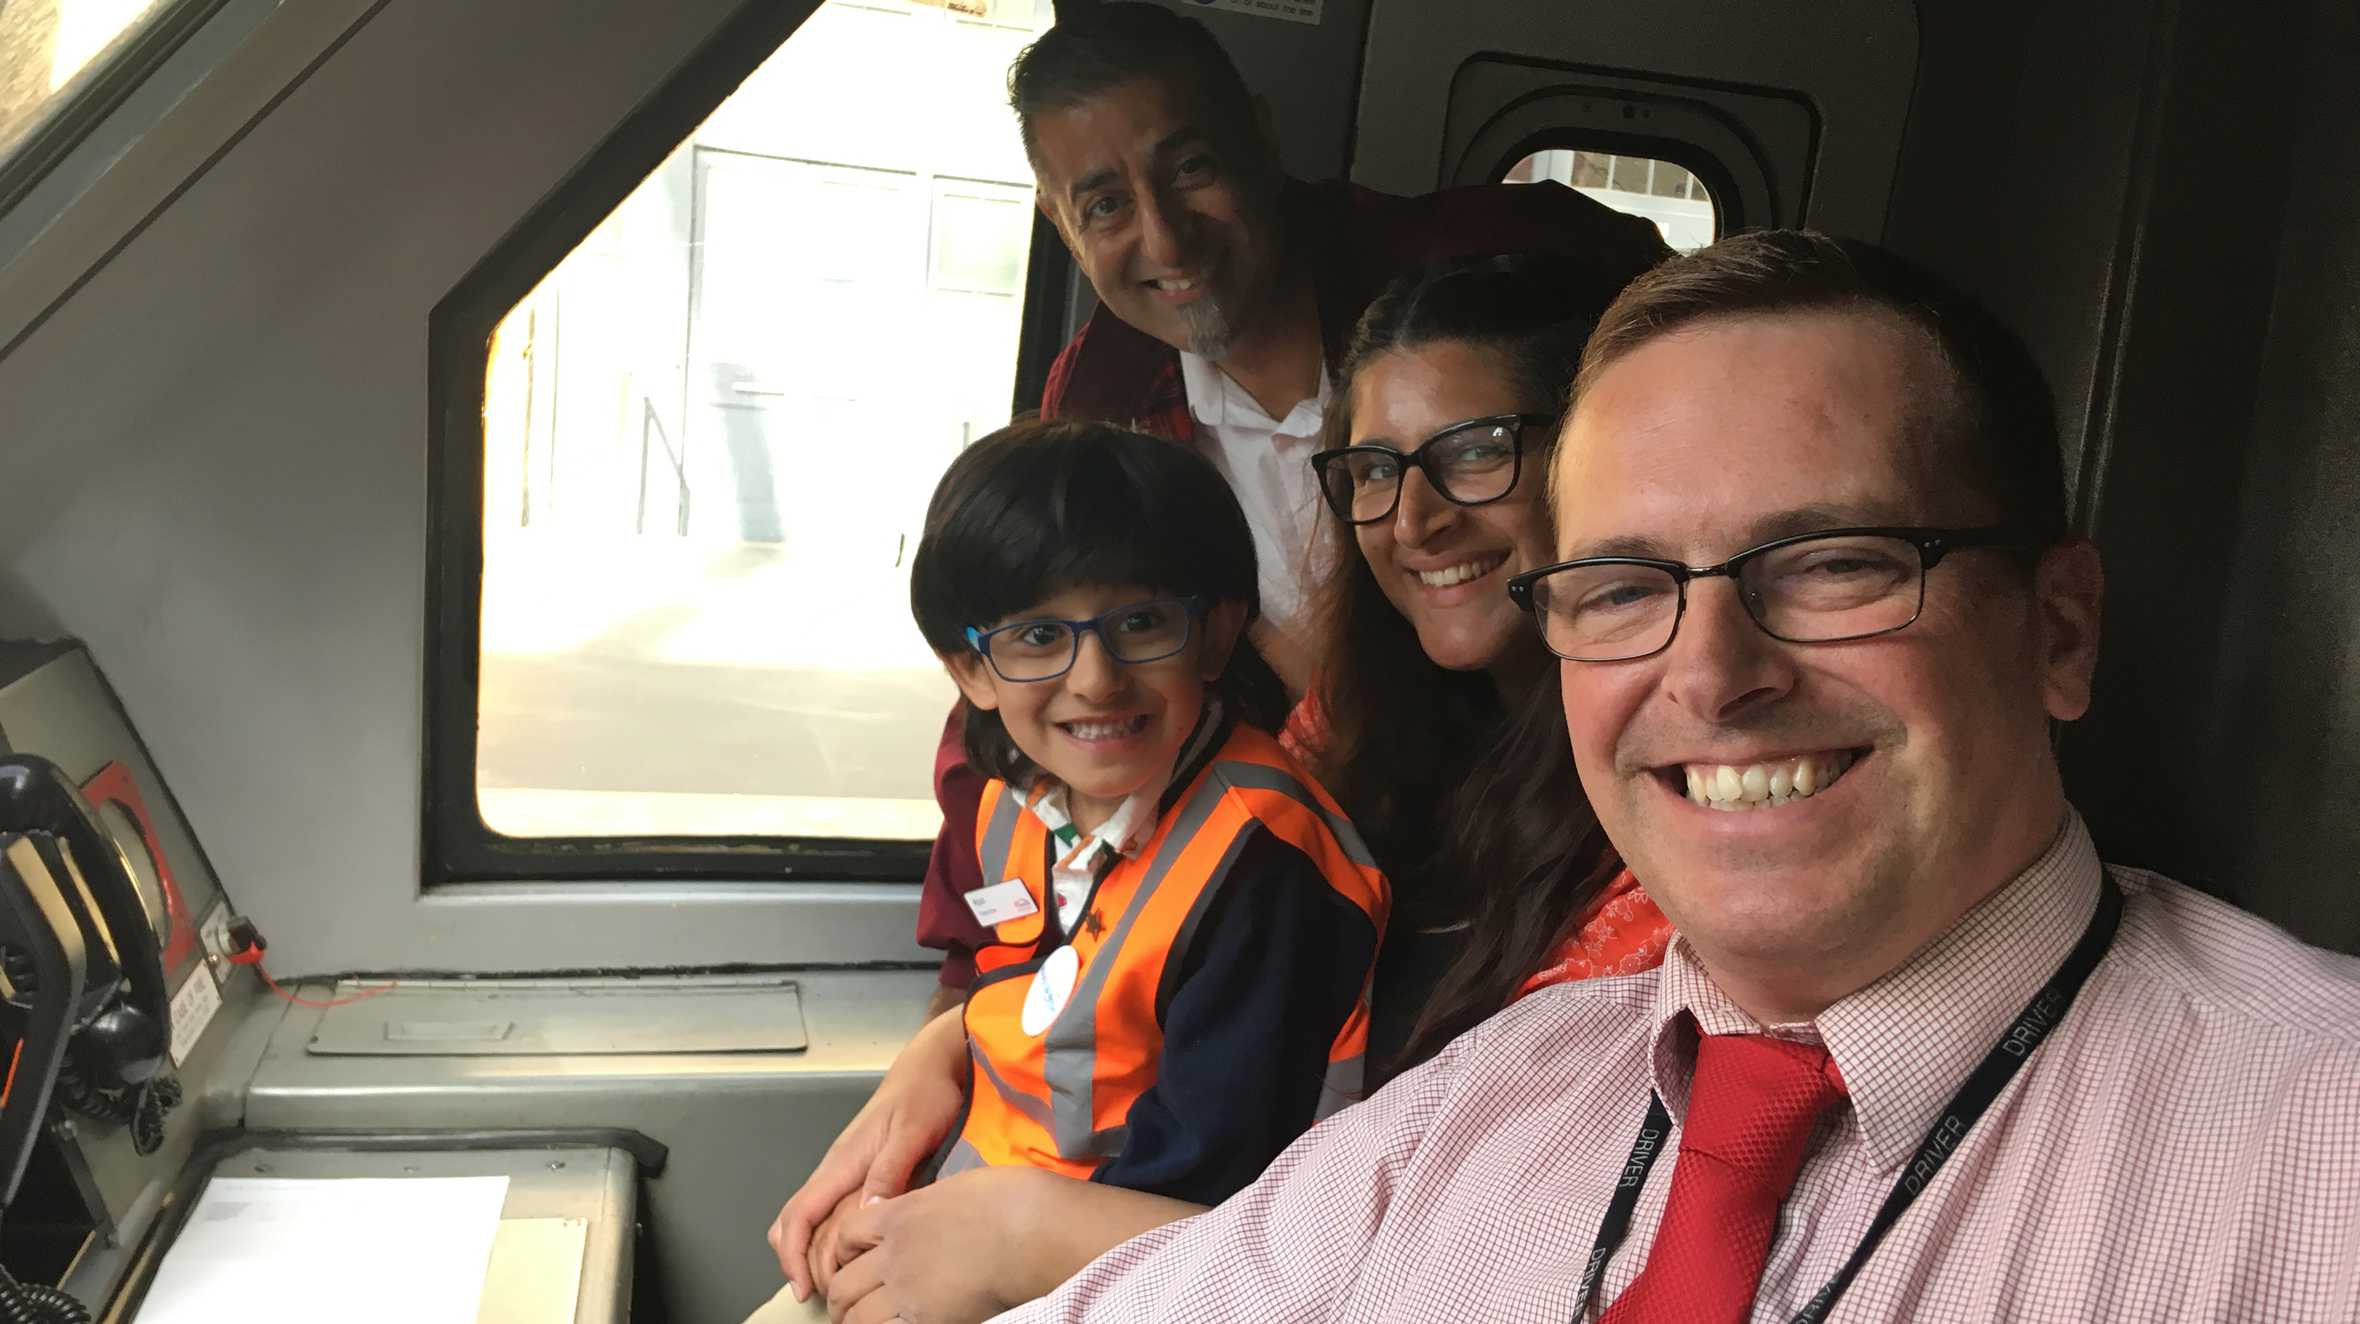 Arjun with his mum and dad and a member of Virgin staff, inside the train